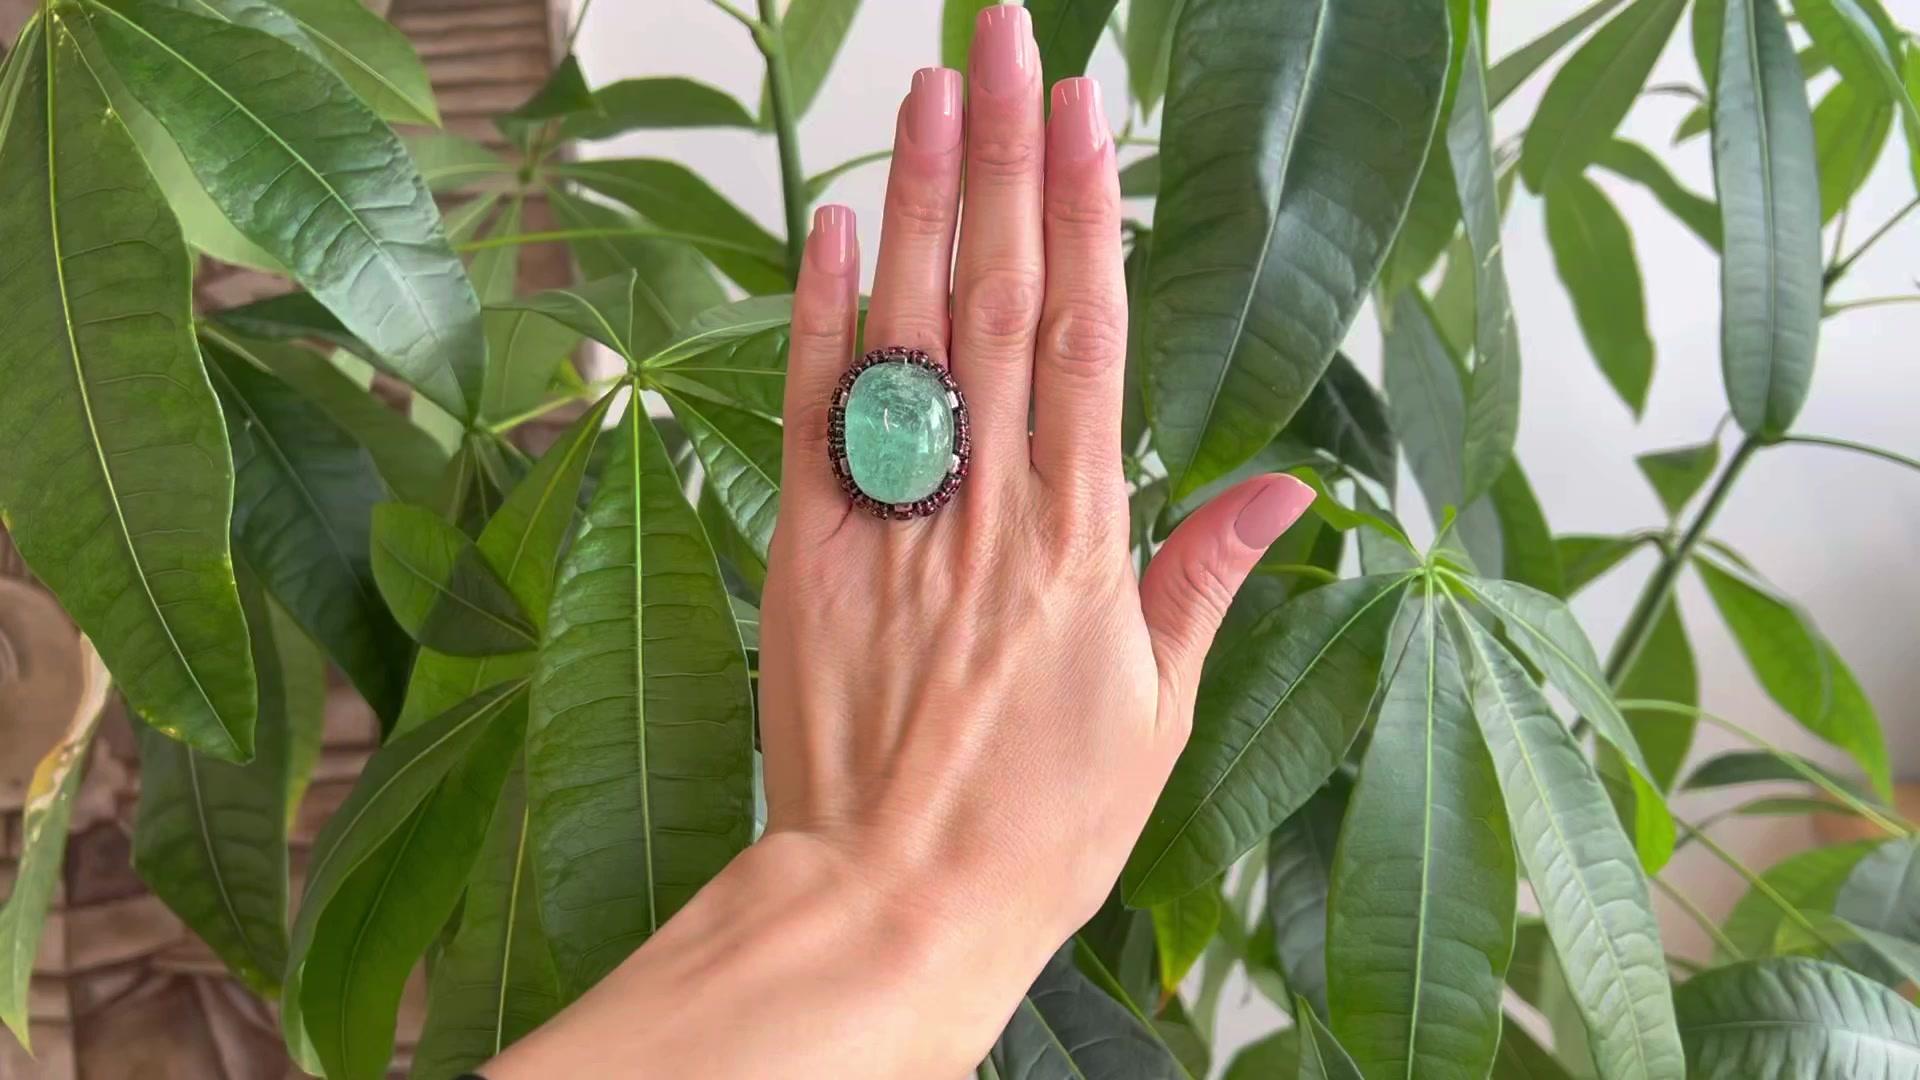 One Vintage French 75.00 Carat Emerald Garnet Silver Statement Cocktail Ring. Featuring one cabochon emerald weighing approximately 75.00 carats. Accented by 54 round brilliant cut garnets with a total weight of approximately 7.45 carats. Crafted in